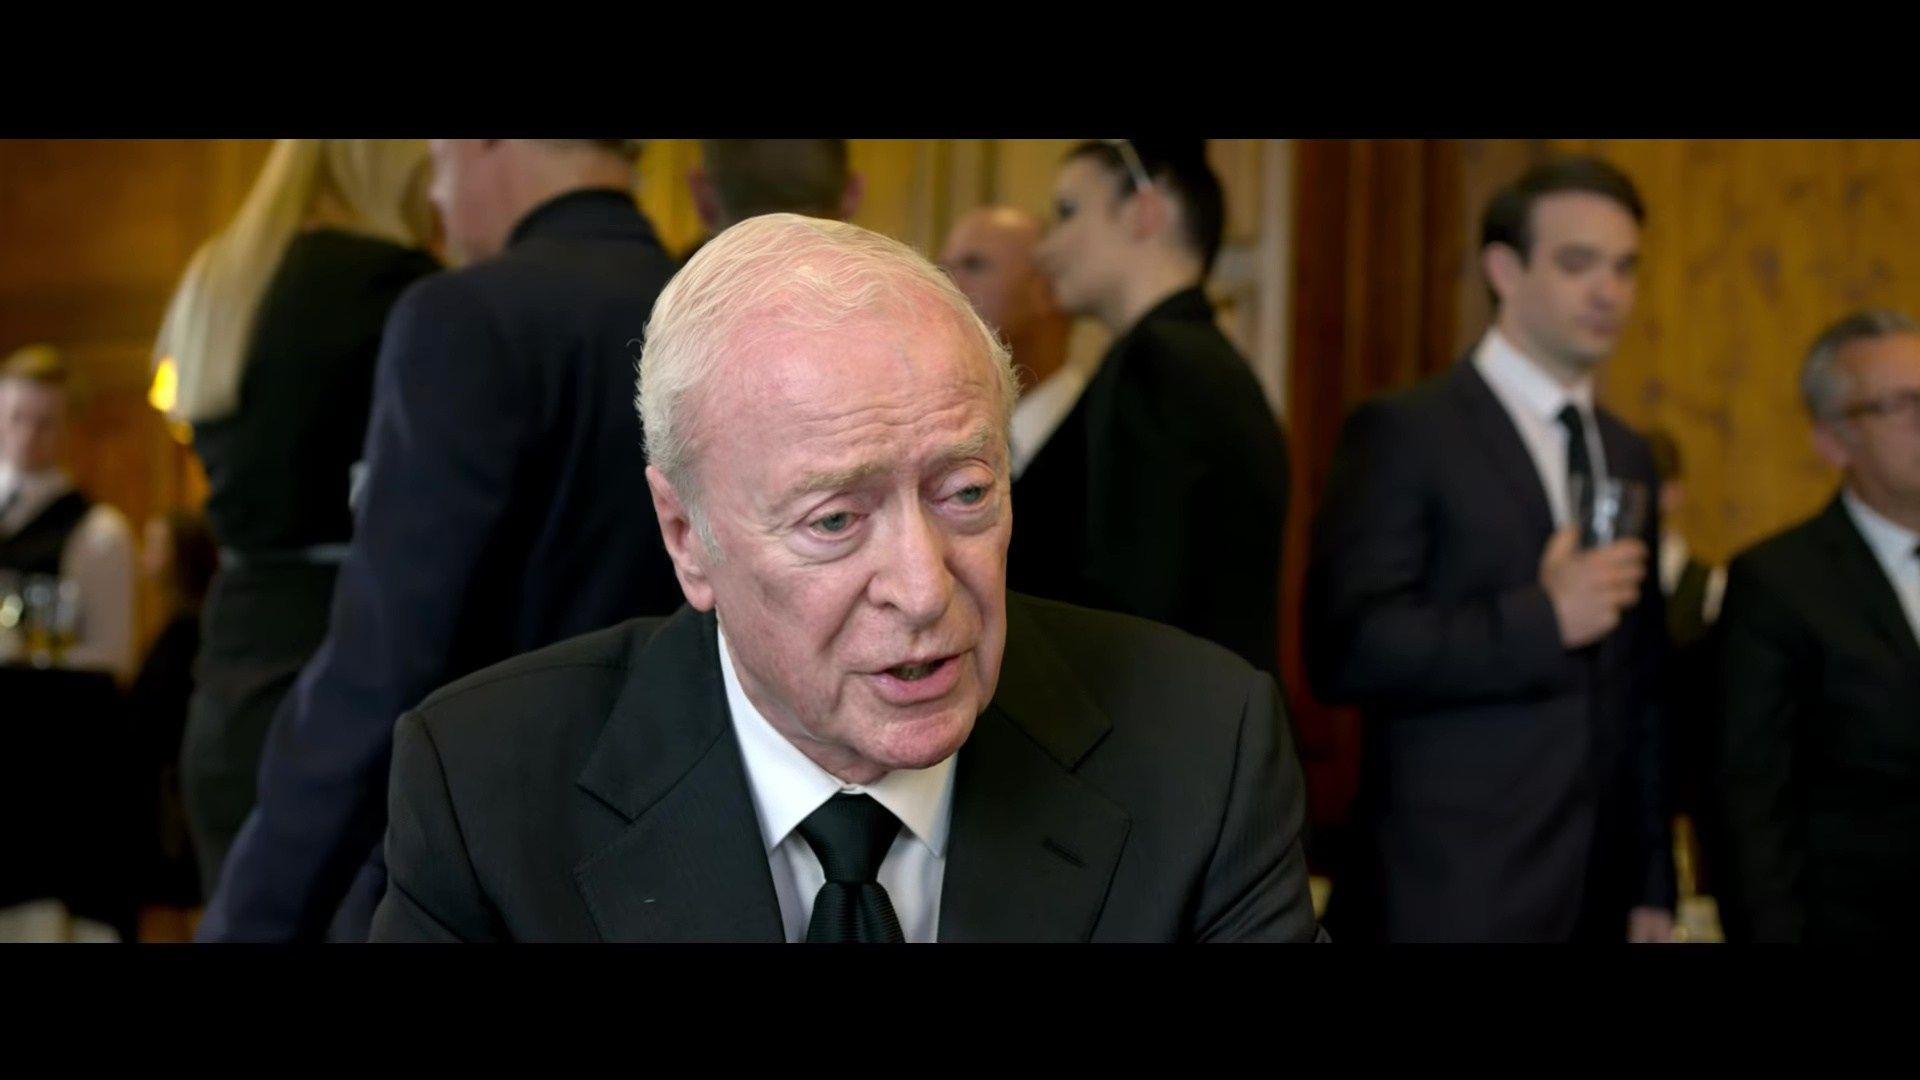 King of Thieves Movie trailer, Teaser Trailer